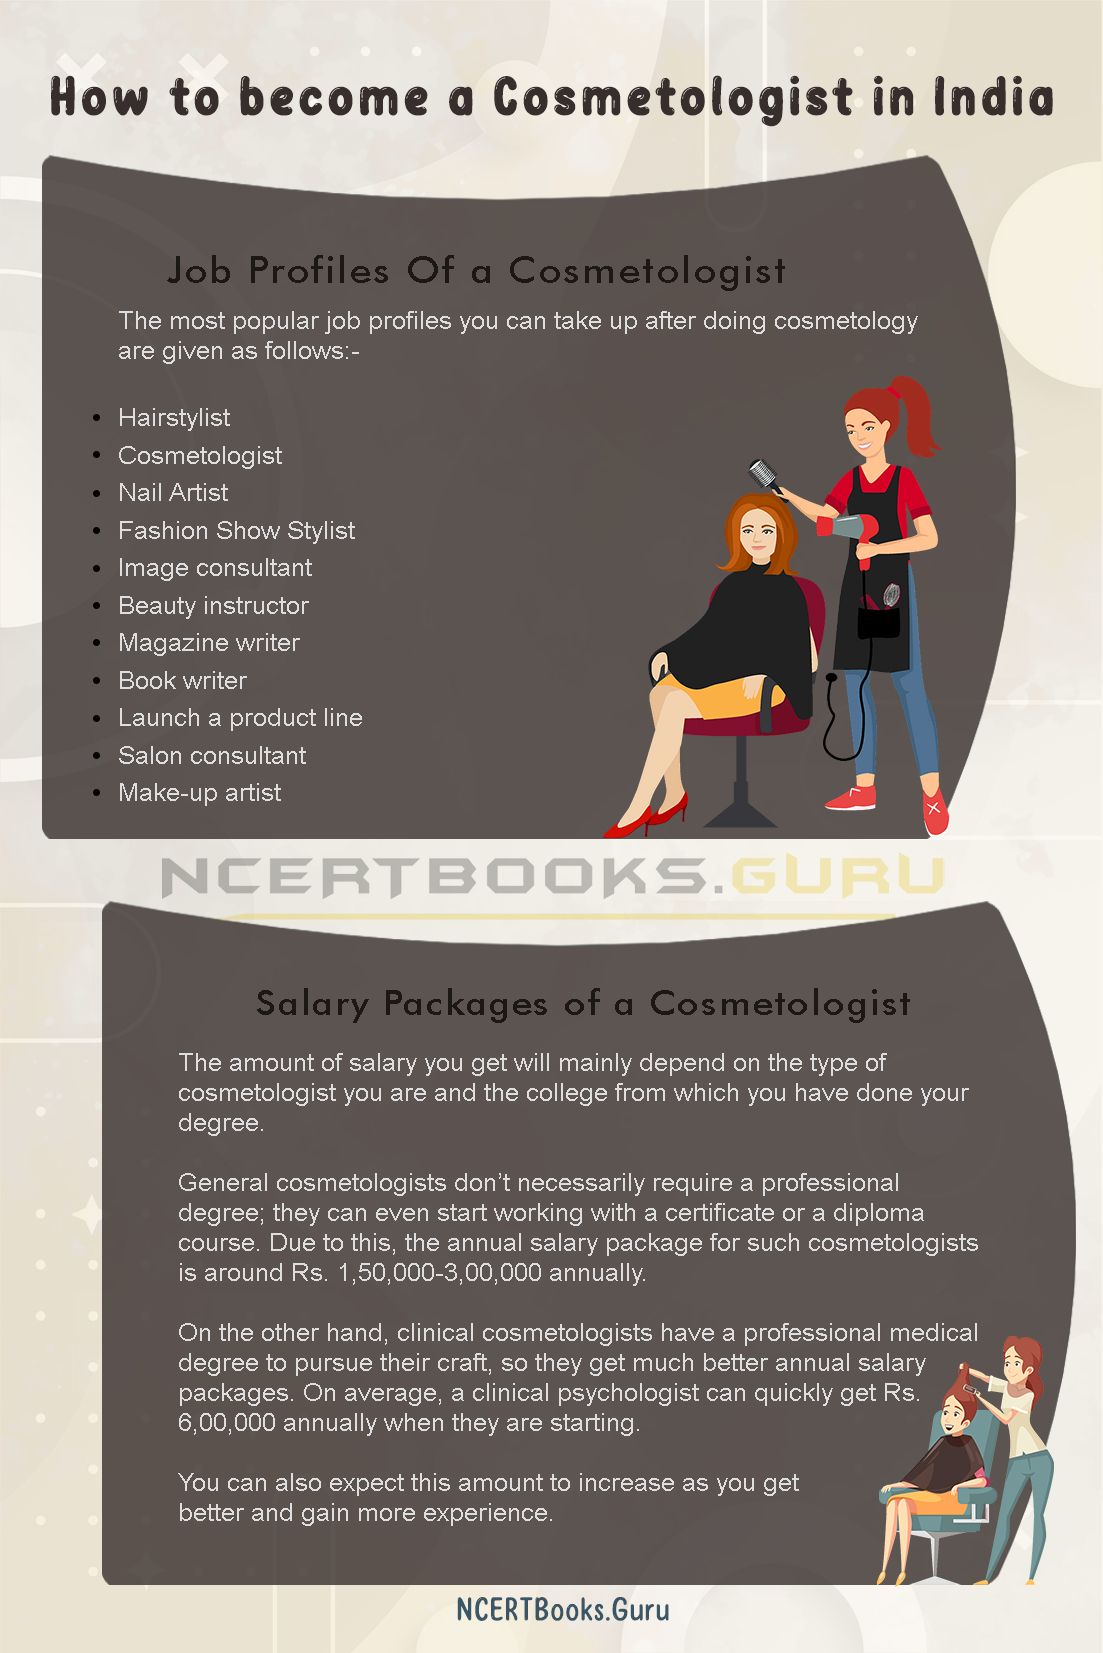 How to become a Cosmetologist in India 2